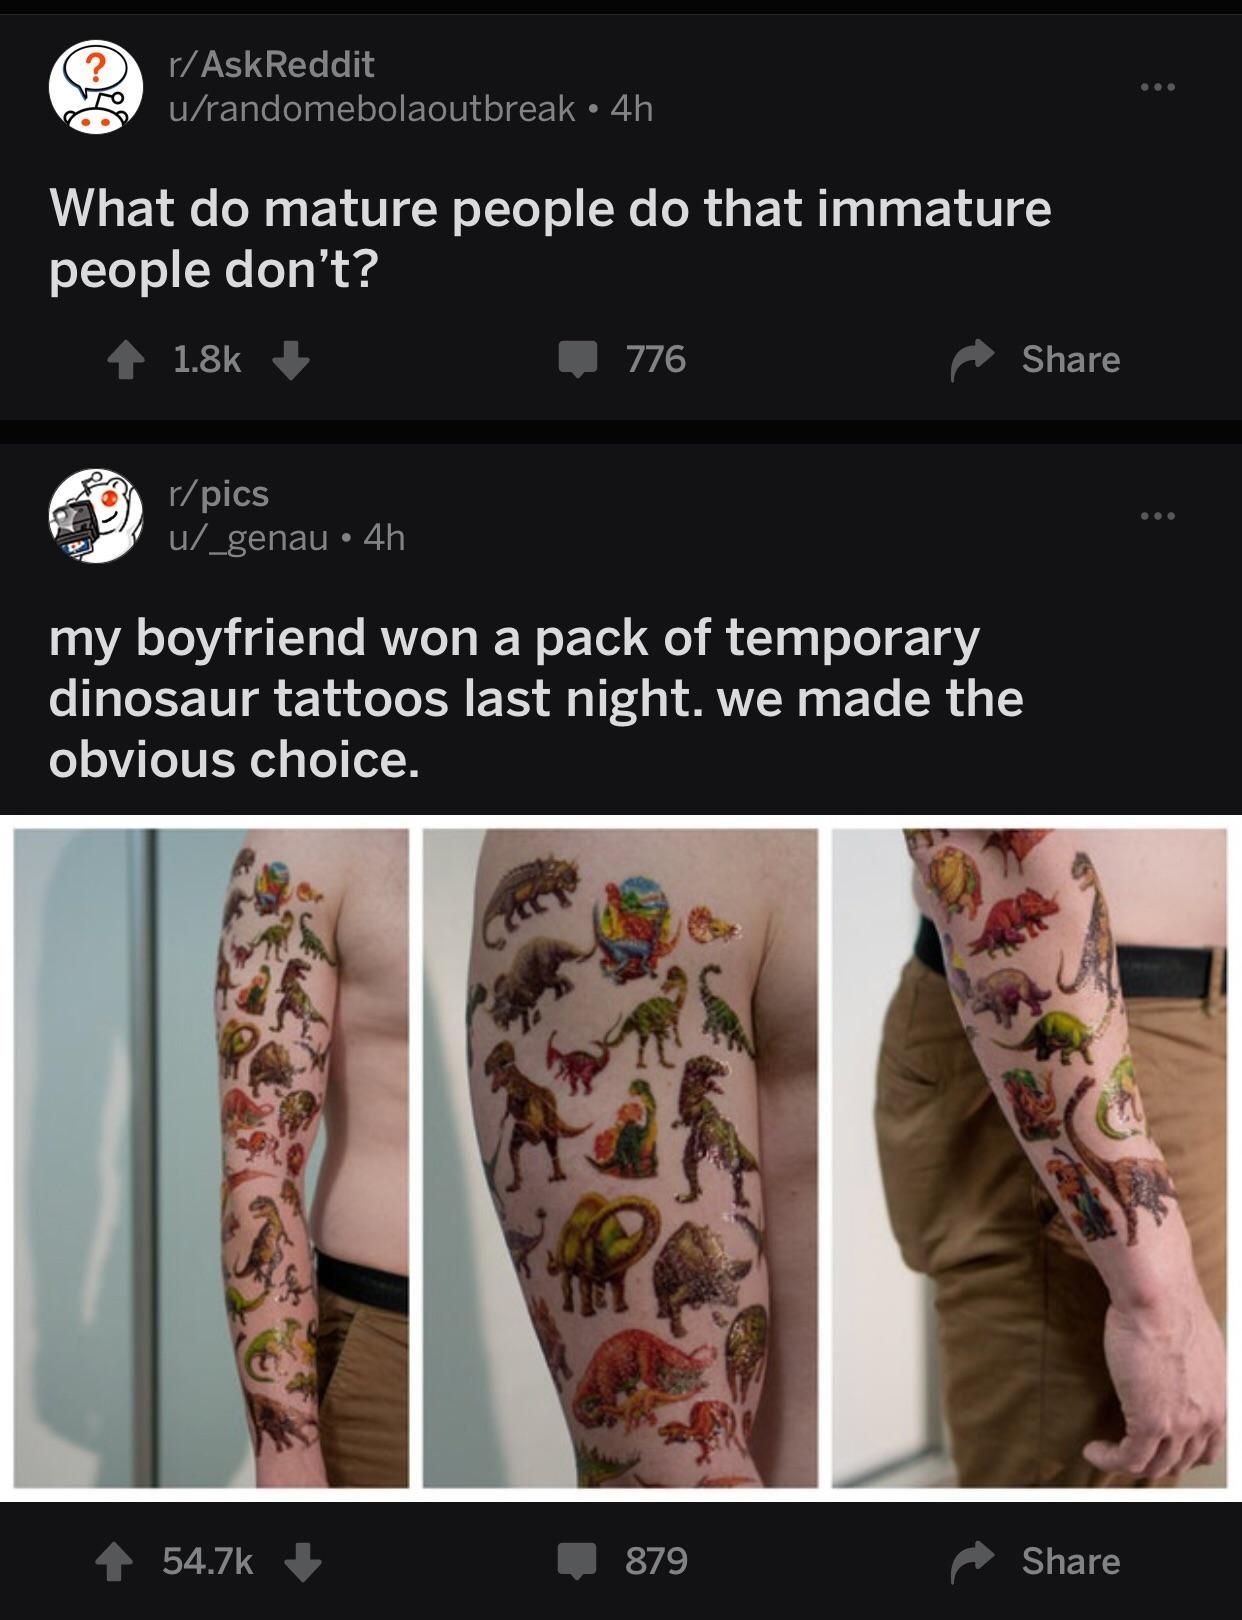 The way these posts lined up on my feed